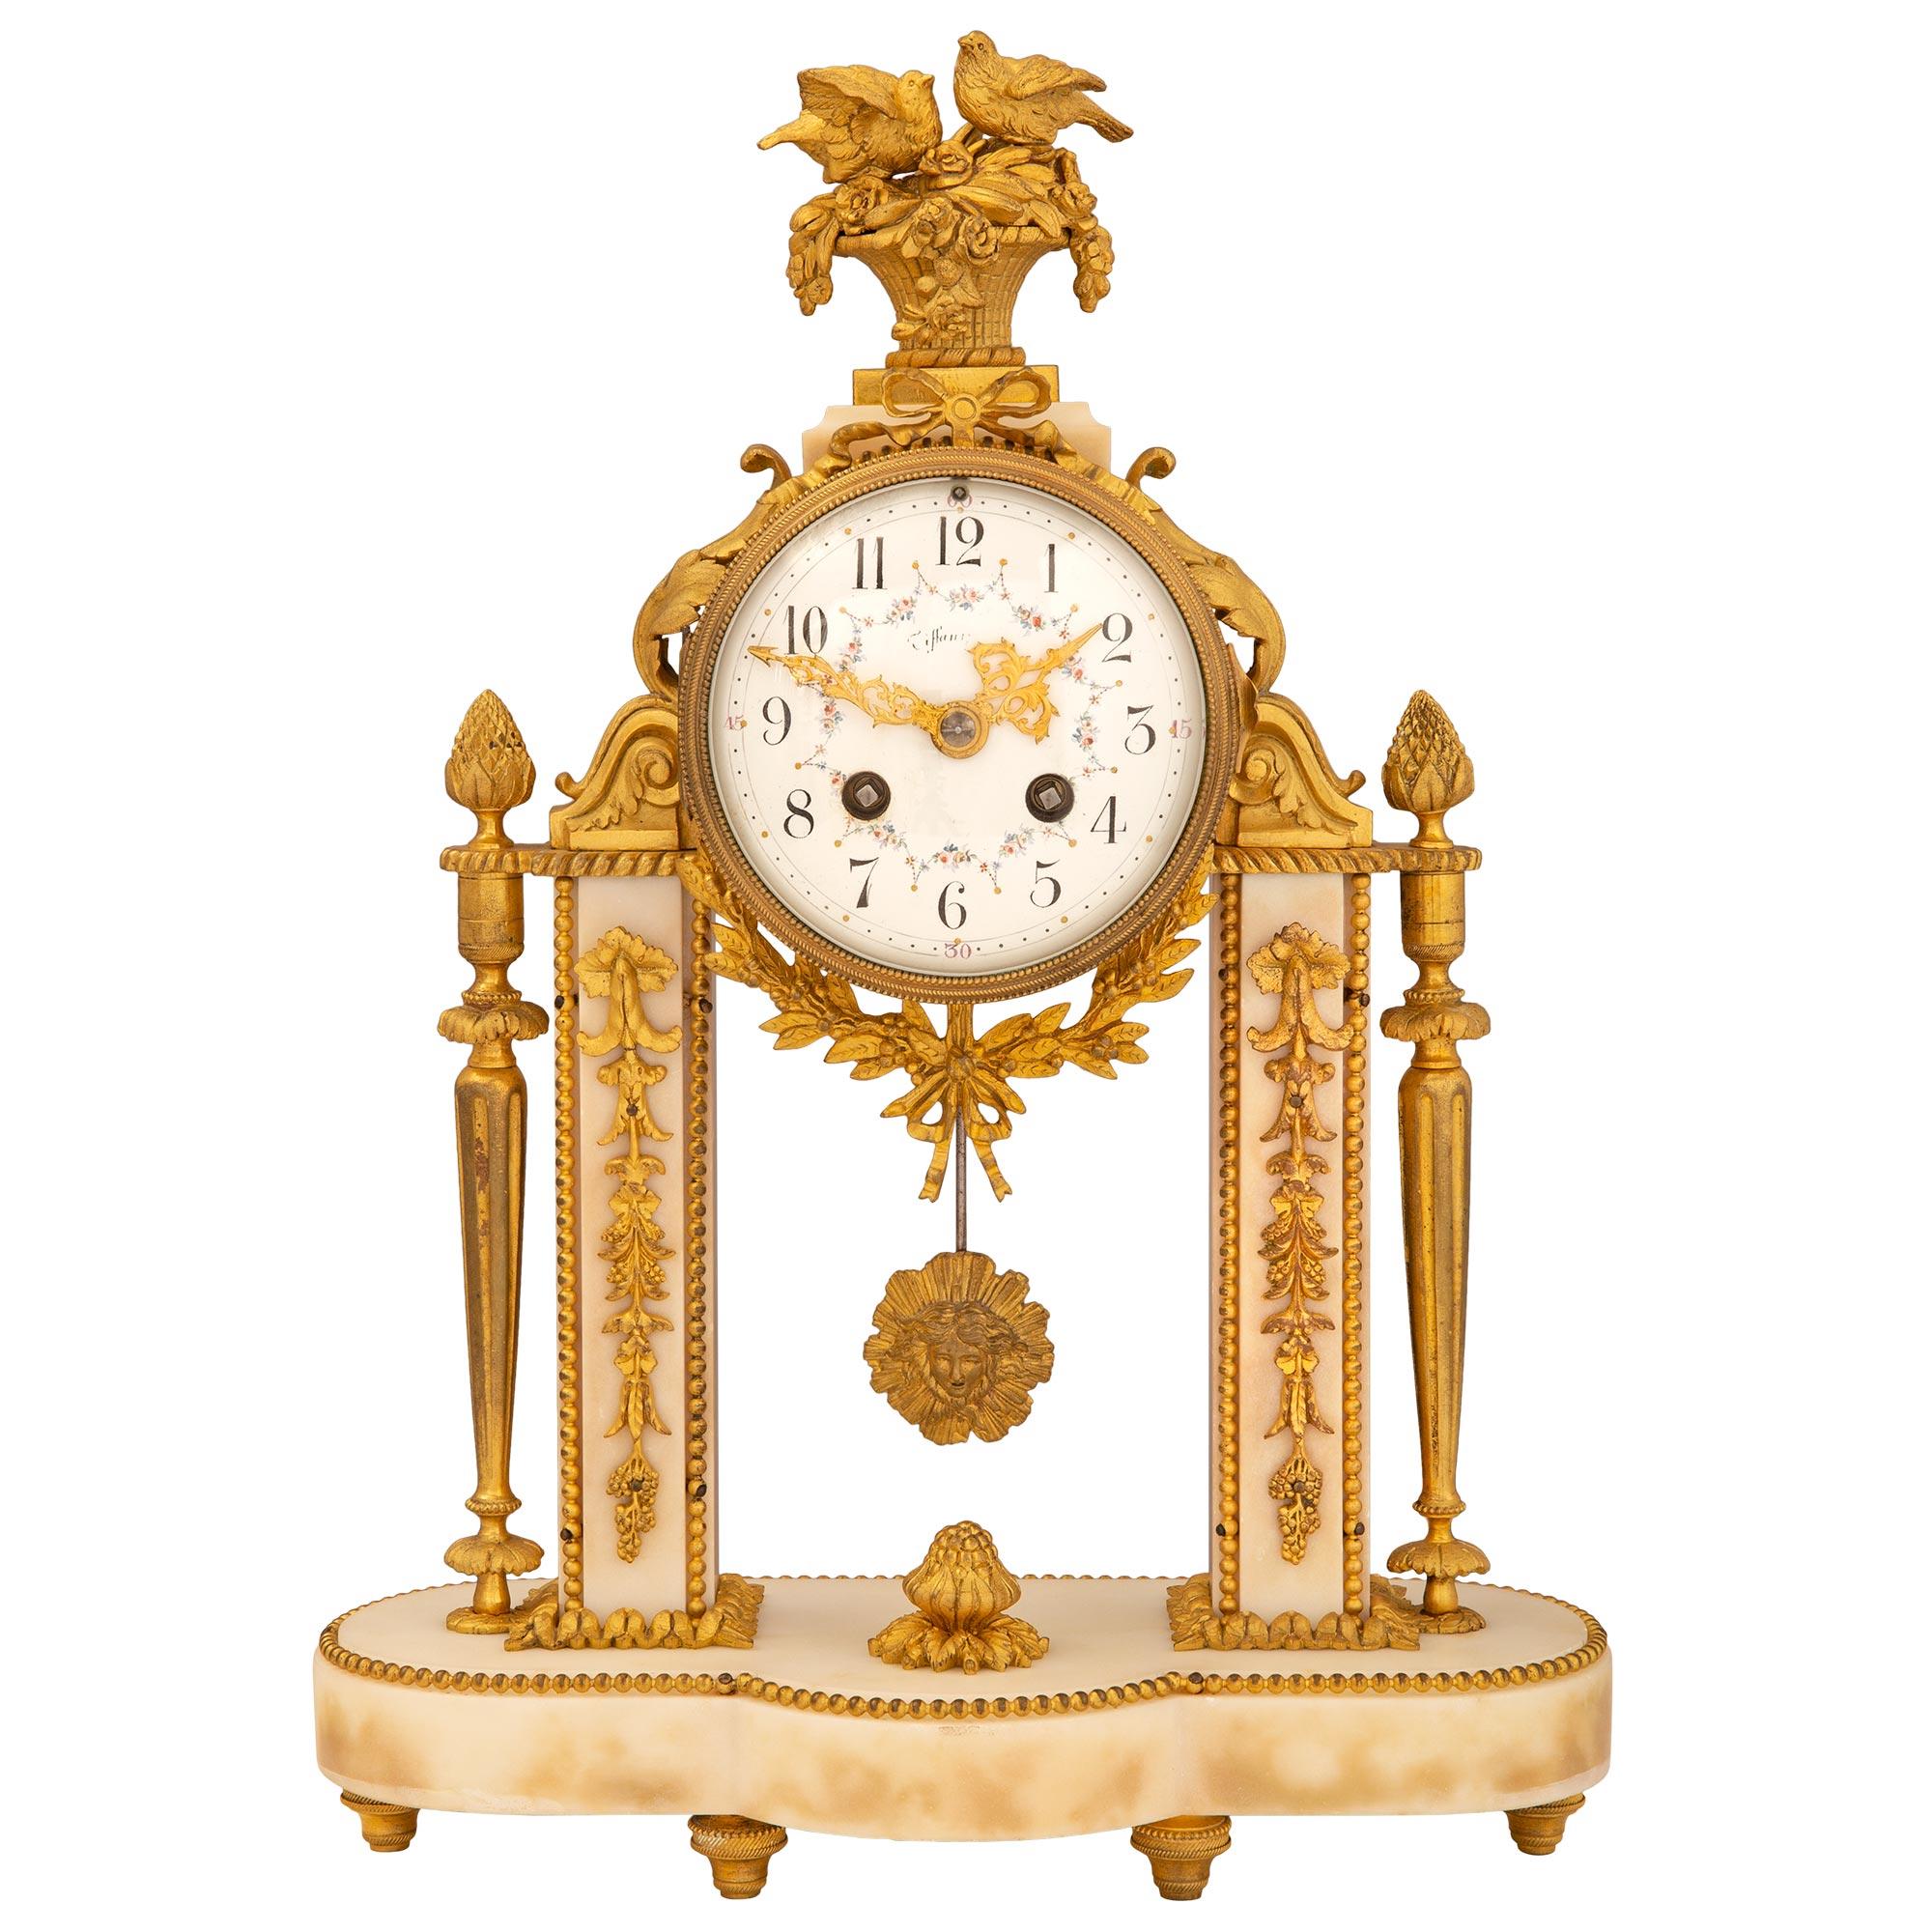 An exquisite and high quality French 19th century Louis XVI st. white Carrara marble and ormolu Portique clock, signed 